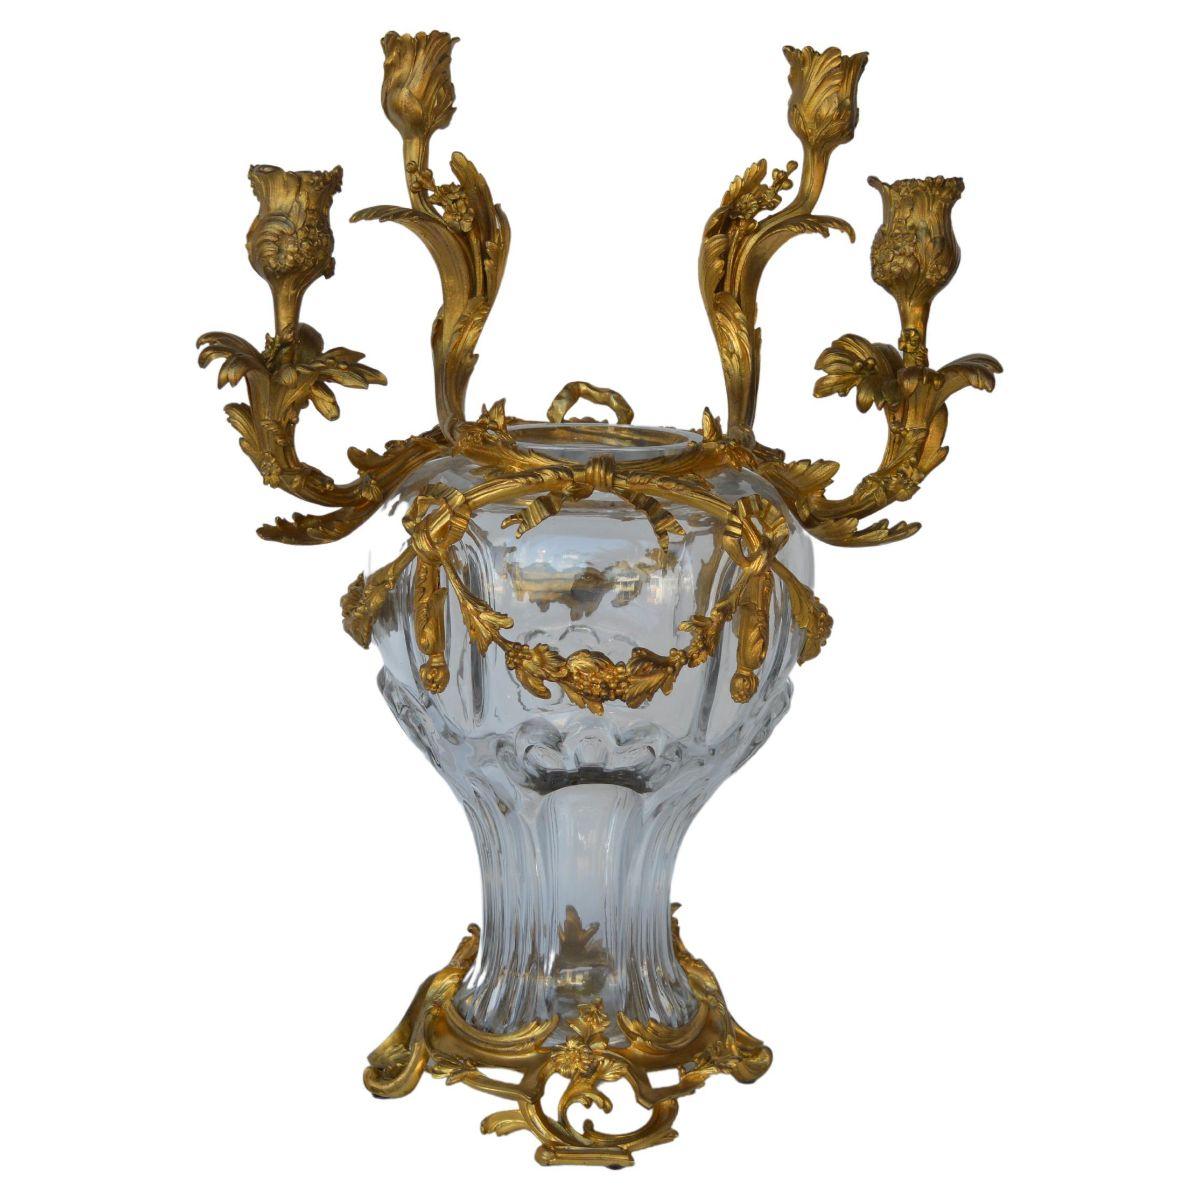 Signed pair of French, 19th Century, Louis XV style glass and gild Ormolu candelabra by Henri Vian.

Henri Vian, (1860-1905) was a celebrated Parisian bronzier, specializing in the production of bronzes in the 18th century style and interior